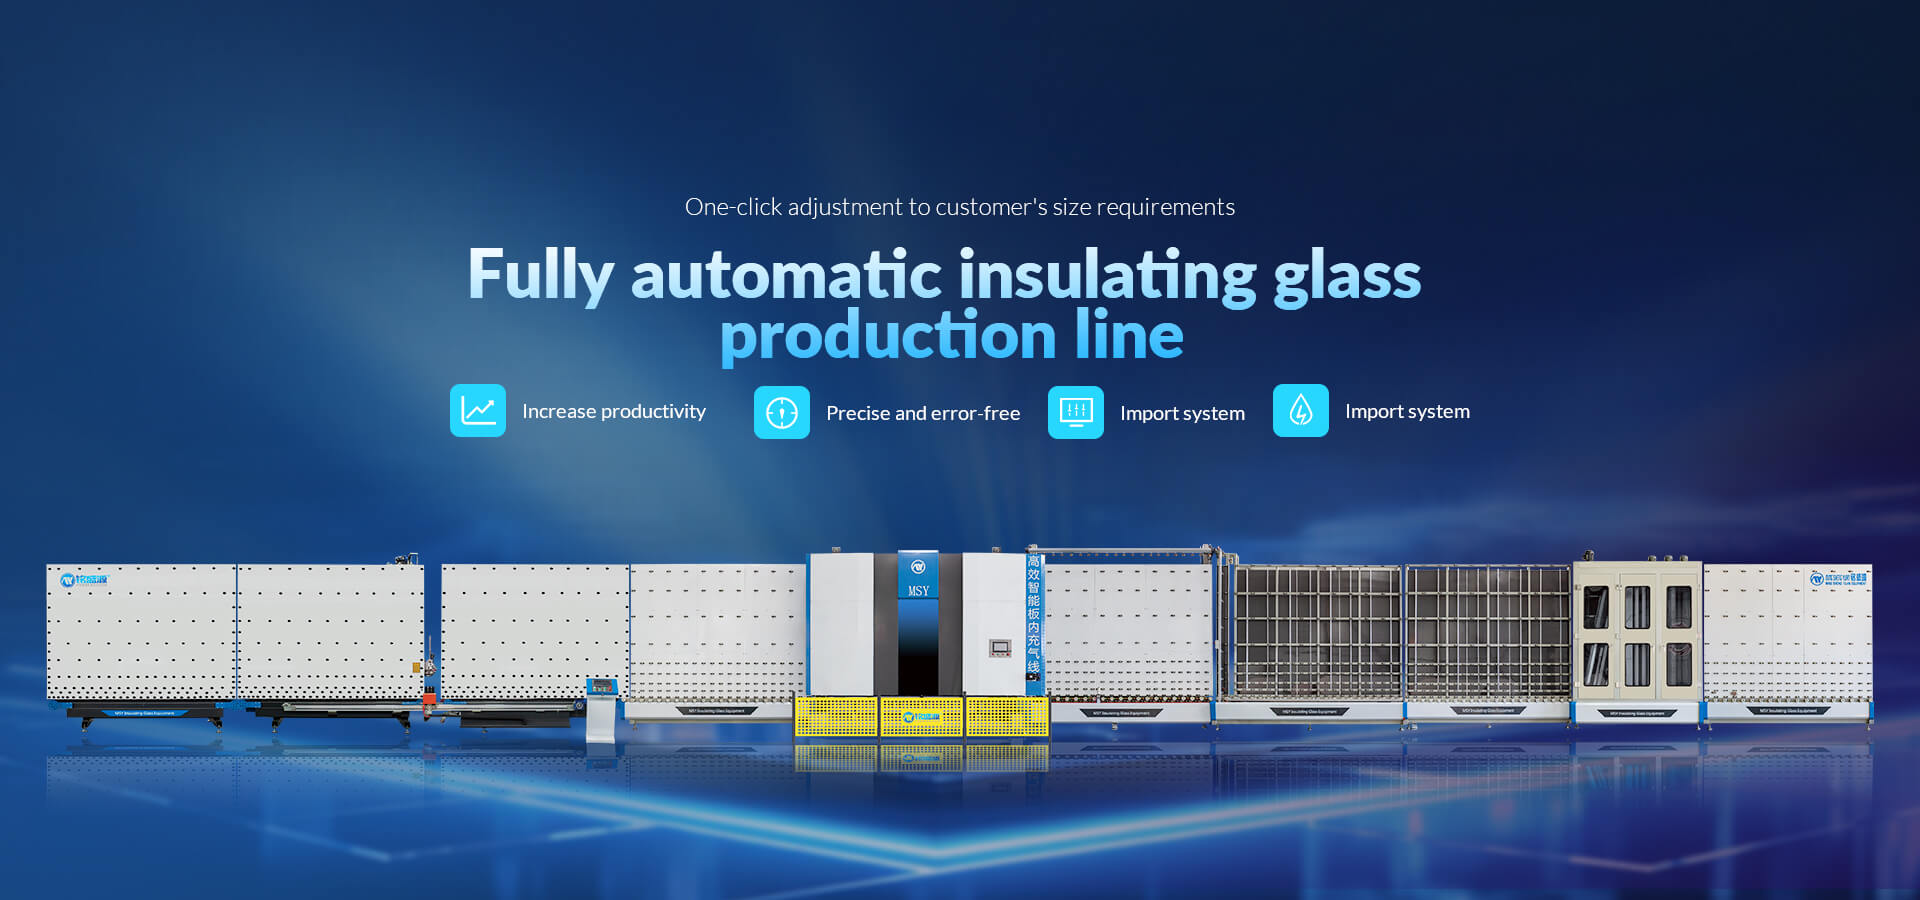 Fully automatic insulating glass production line